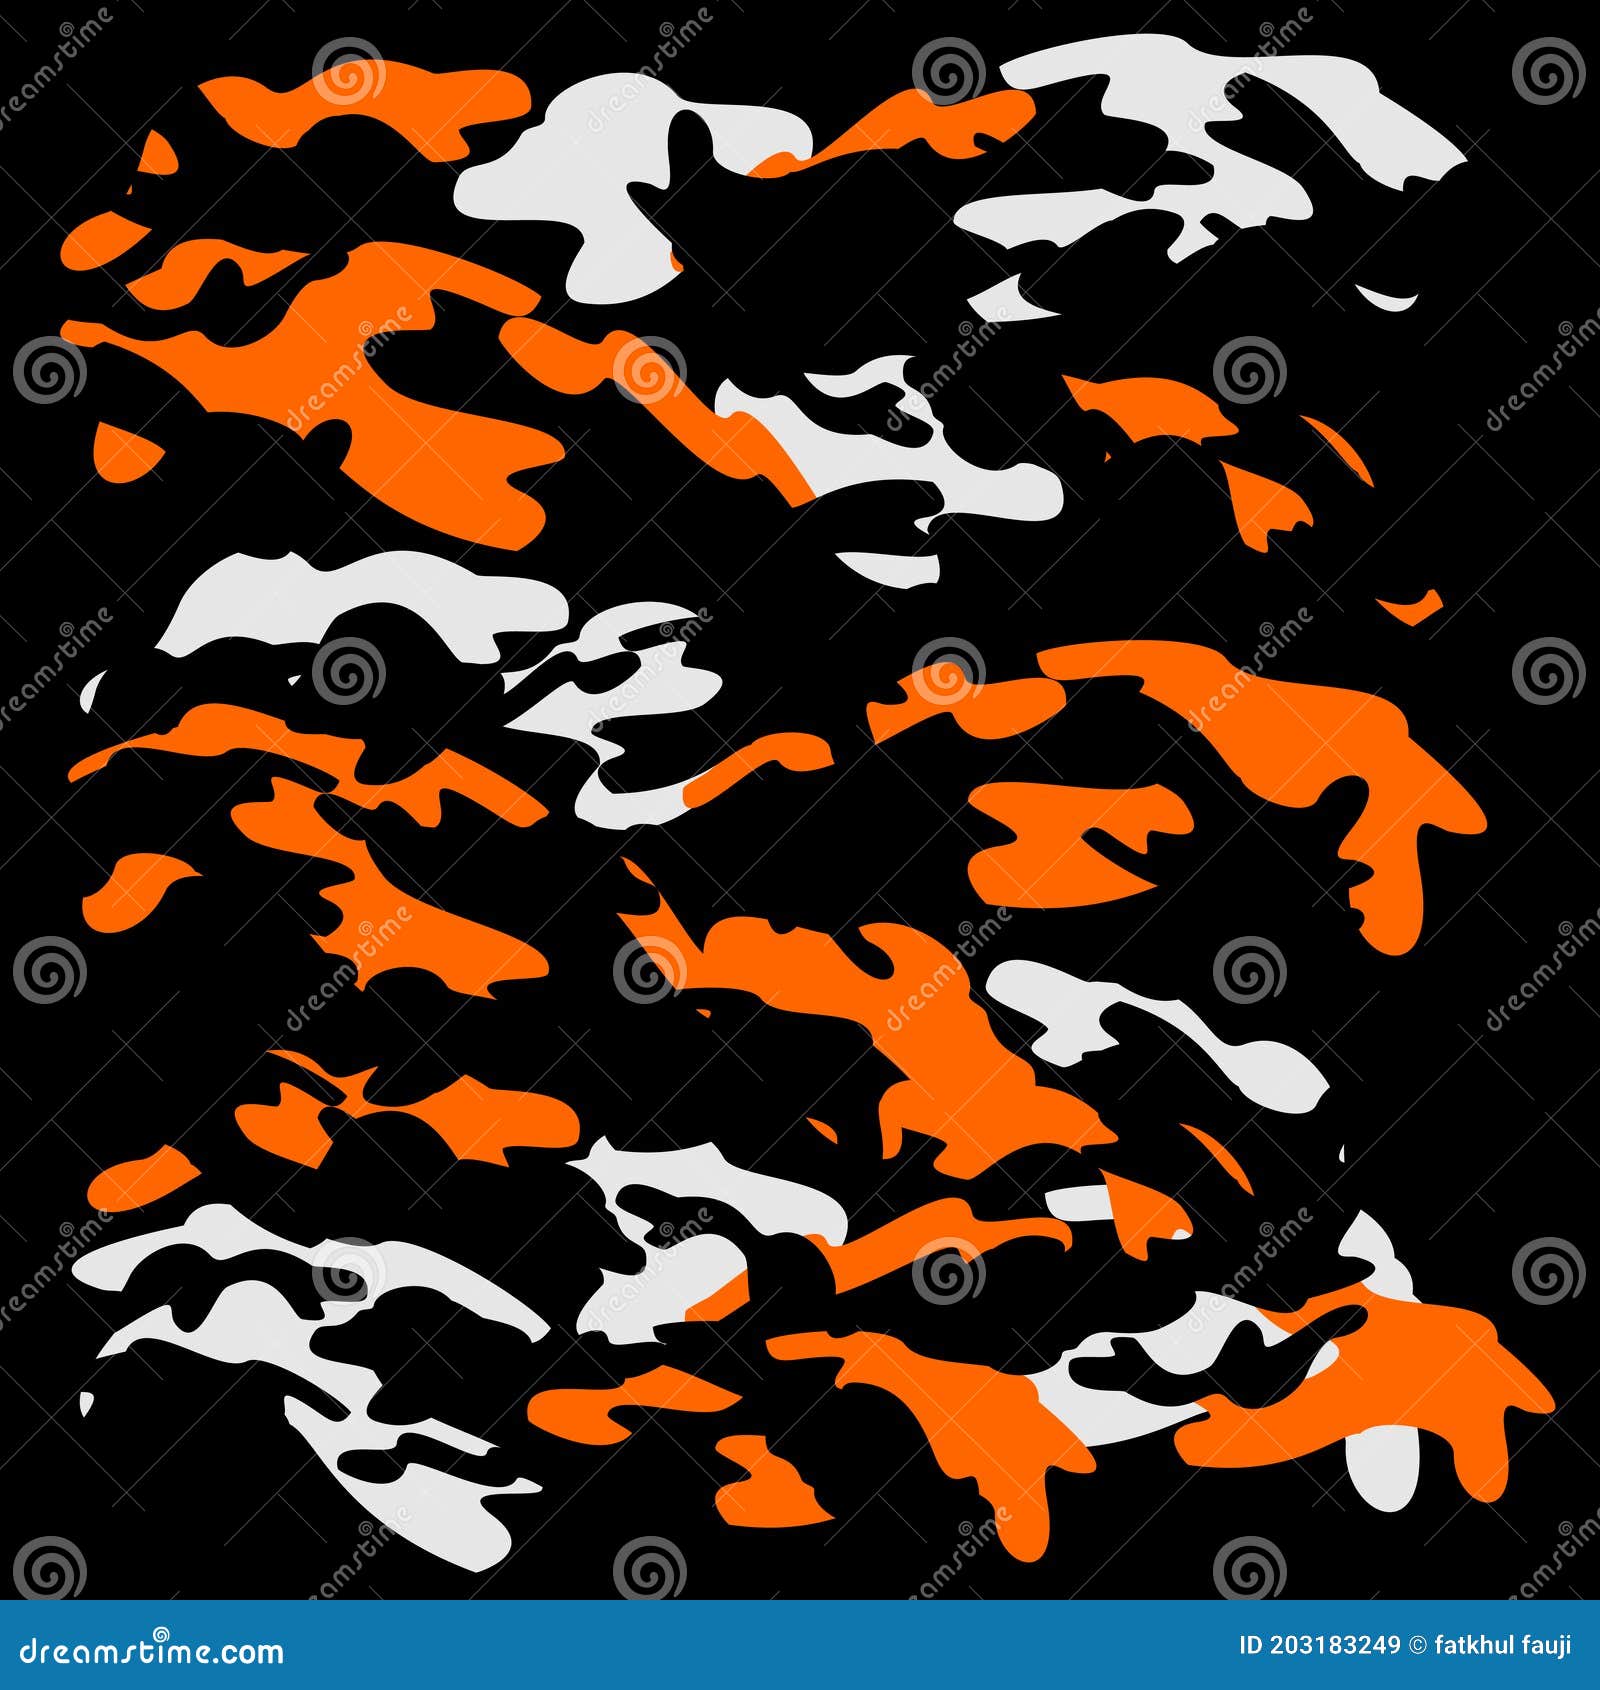 https://thumbs.dreamstime.com/z/army-camouflage-seamless-pattern-orange-white-black-background-army-camouflage-seamless-pattern-orange-white-203183249.jpg